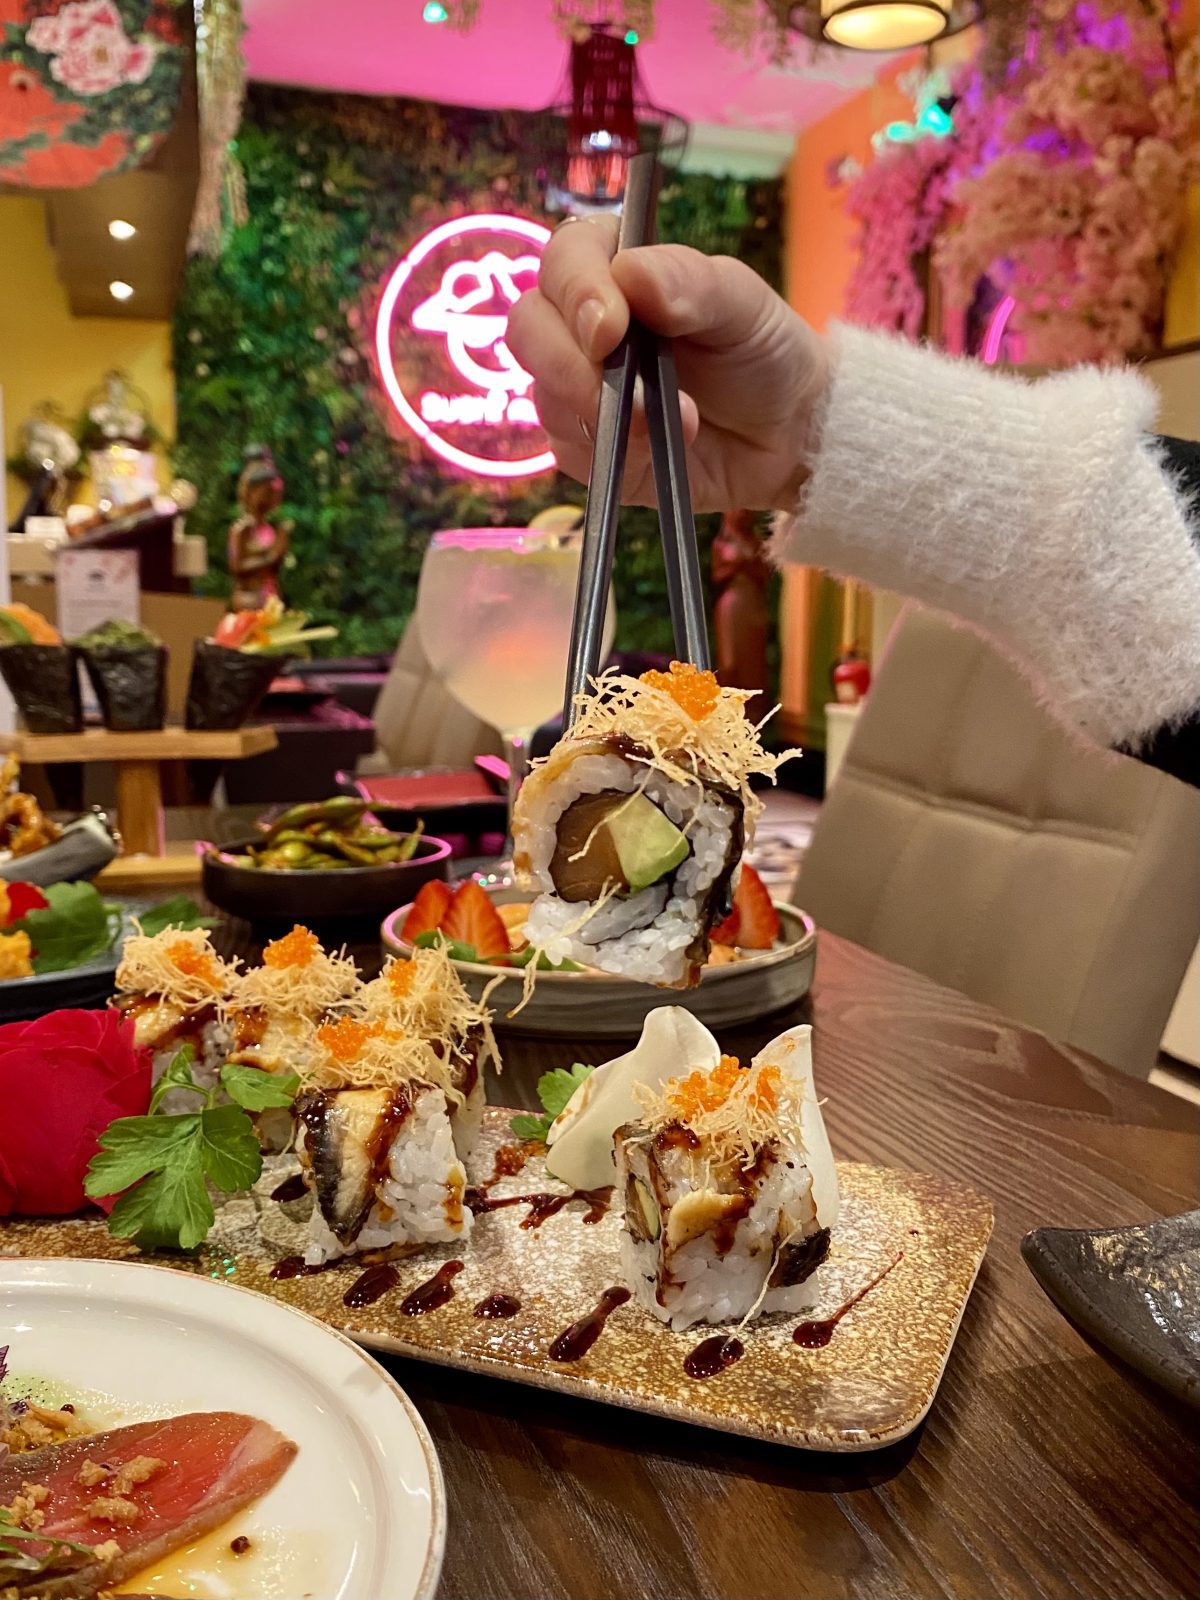 Manchester's Japanese restaurant with an all-you-can-eat sushi menu, The Manc